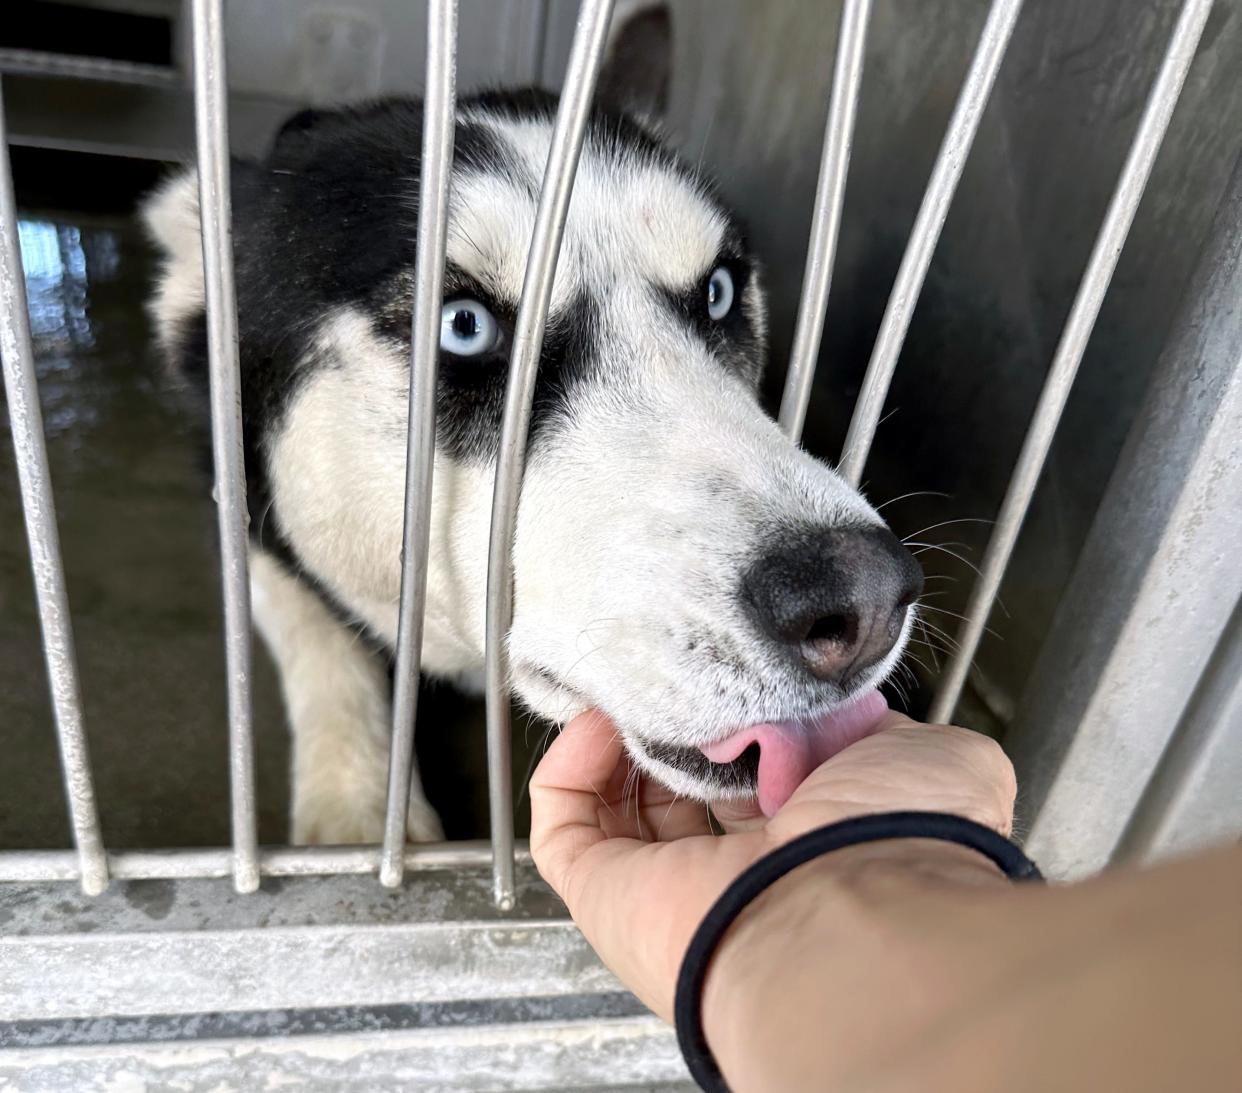 This husky was rescued by Husky Halfway House in Eufaula. H3's founder Jenni Dietsch says that Wagmor Pets, a celebrity-endorsed dog rescue based in California, has been raising funds by claiming it rescued huskies that Dietsch had already paid to rescue and transport to Oklahoma.